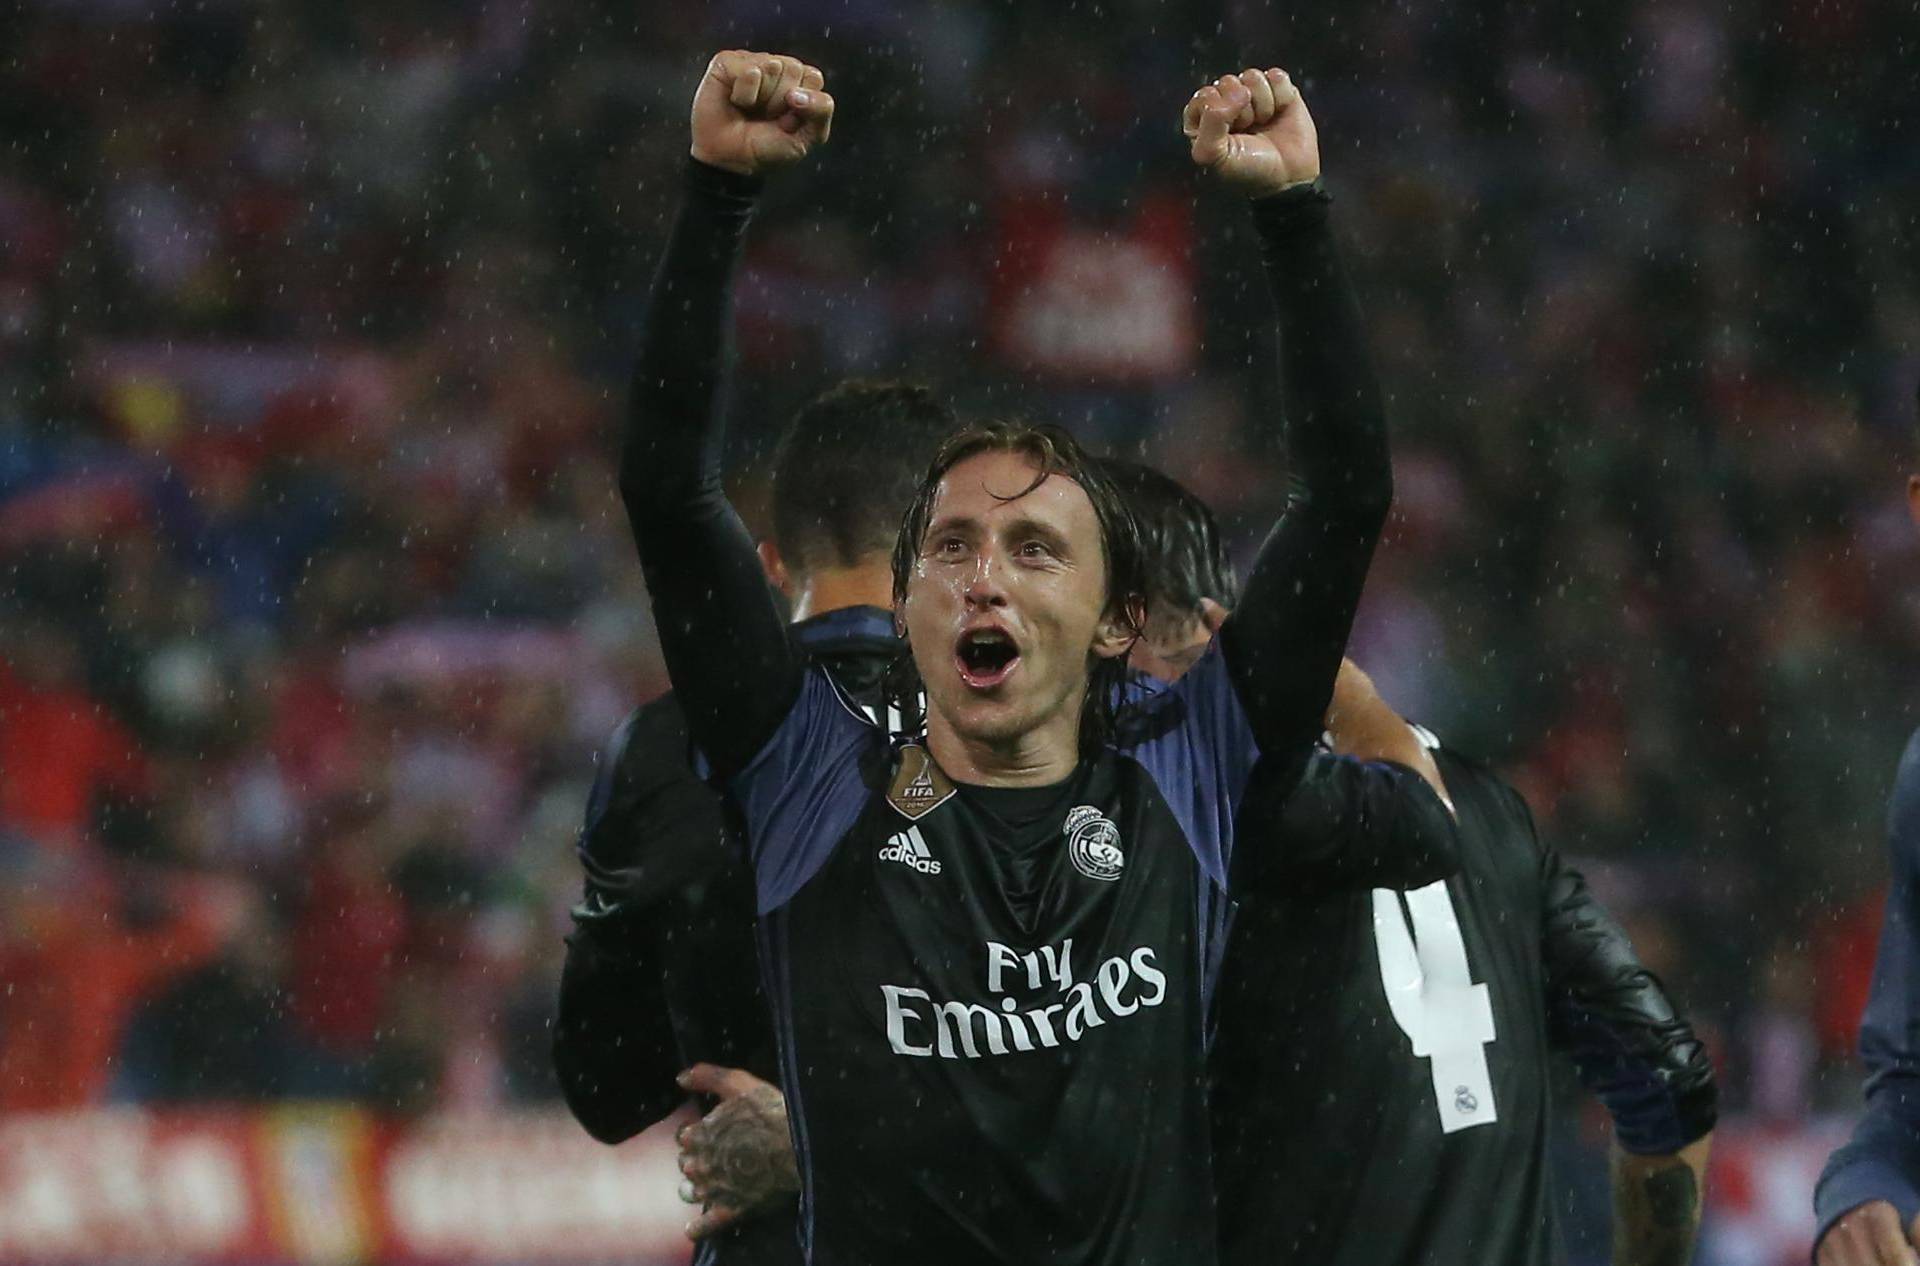 Real Madrid's Luka Modric celebrates after the match